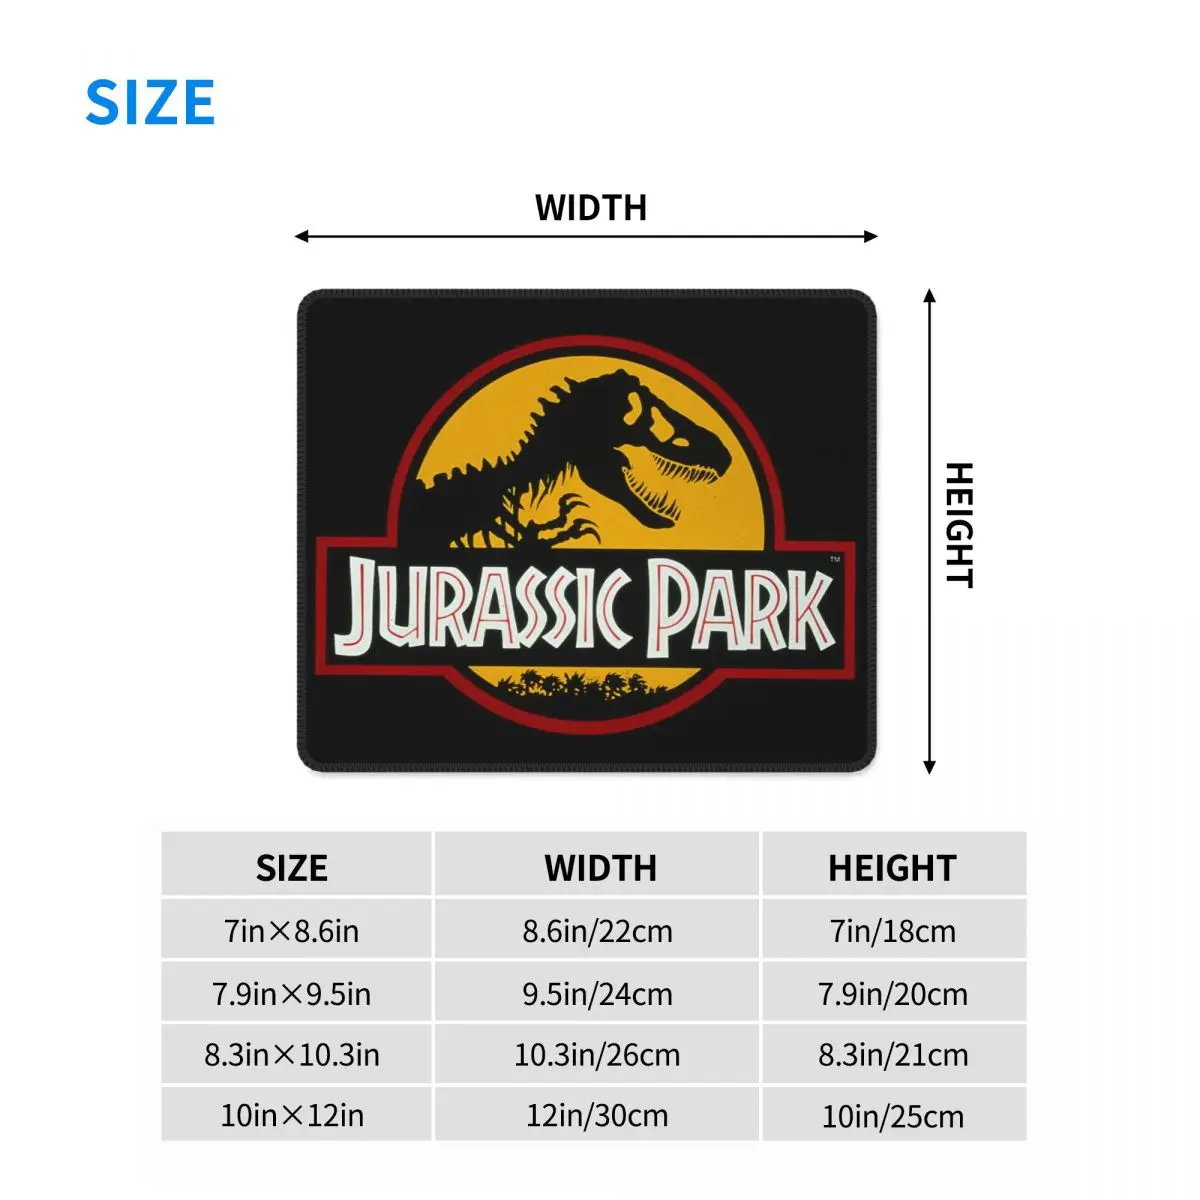 Jurassic Park Ancient Animal Computer Mouse Pads Soft Mousepad with Stitched Edges Rubber Giant Dinsaur Mouse Mat for Gaming images - 6